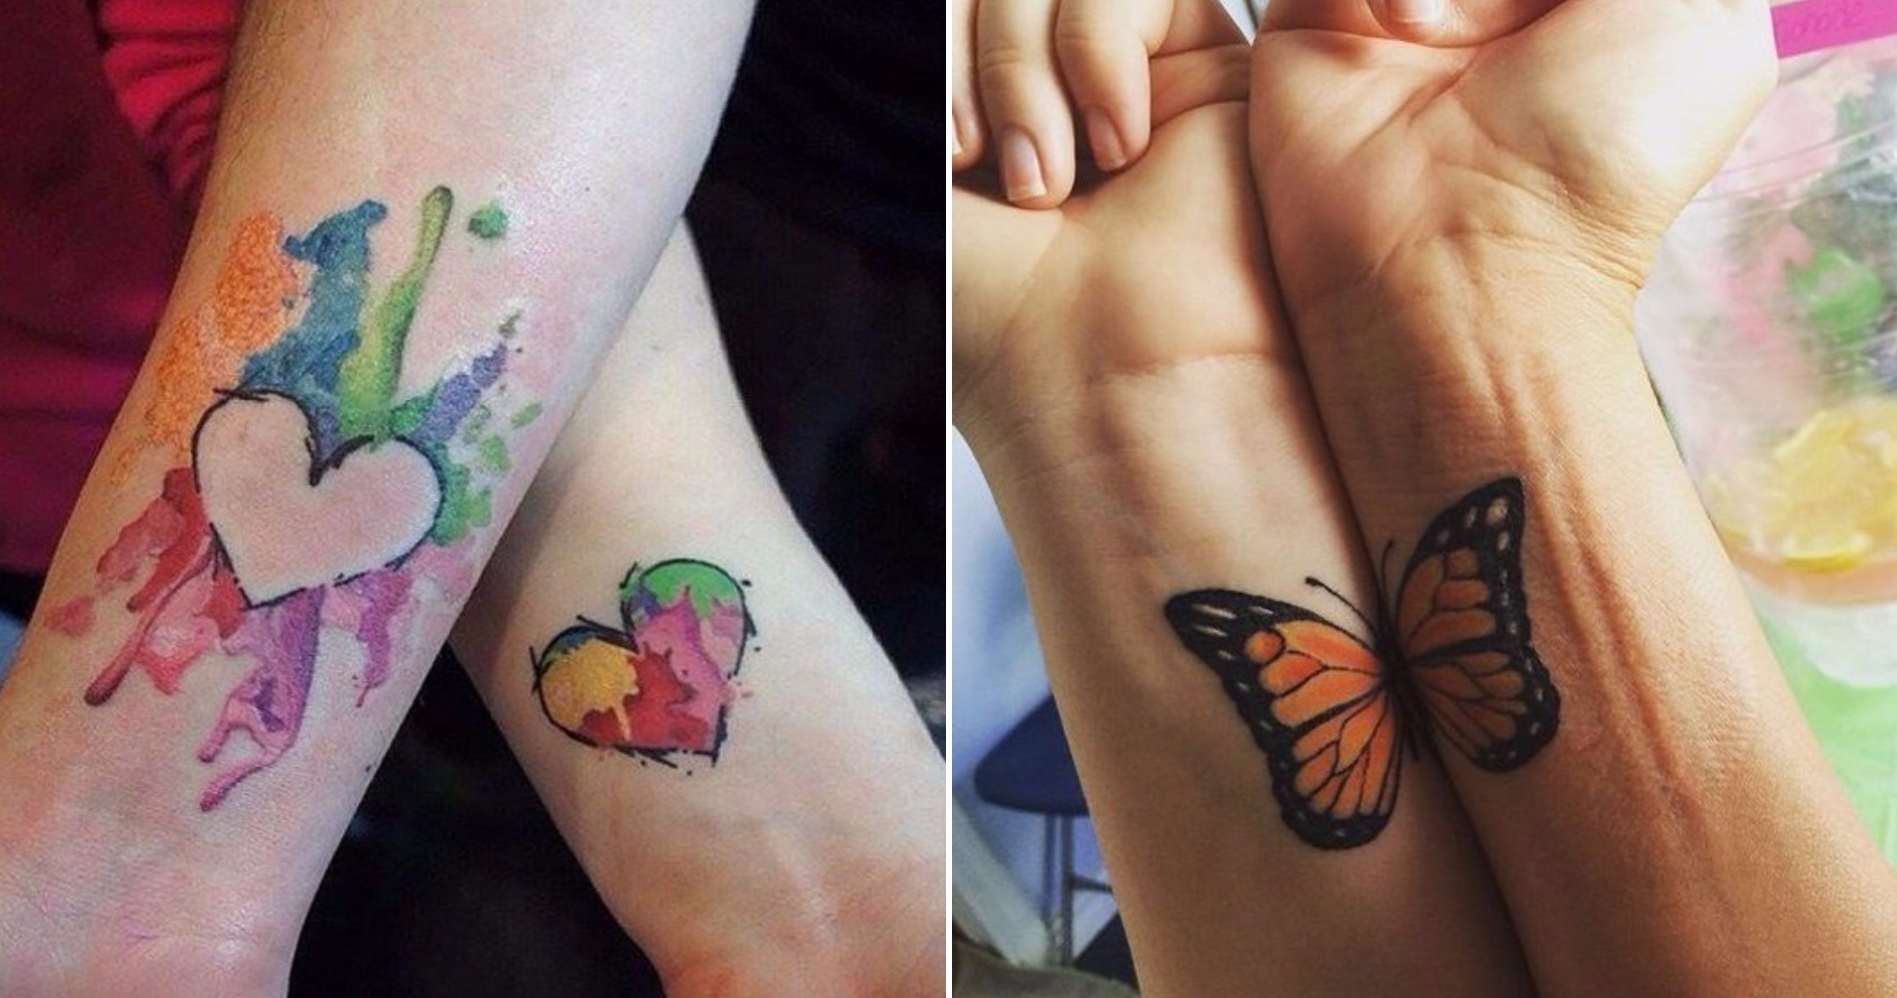 15 Tattoos That Perfectly Capture The Mother-Daughter Bond